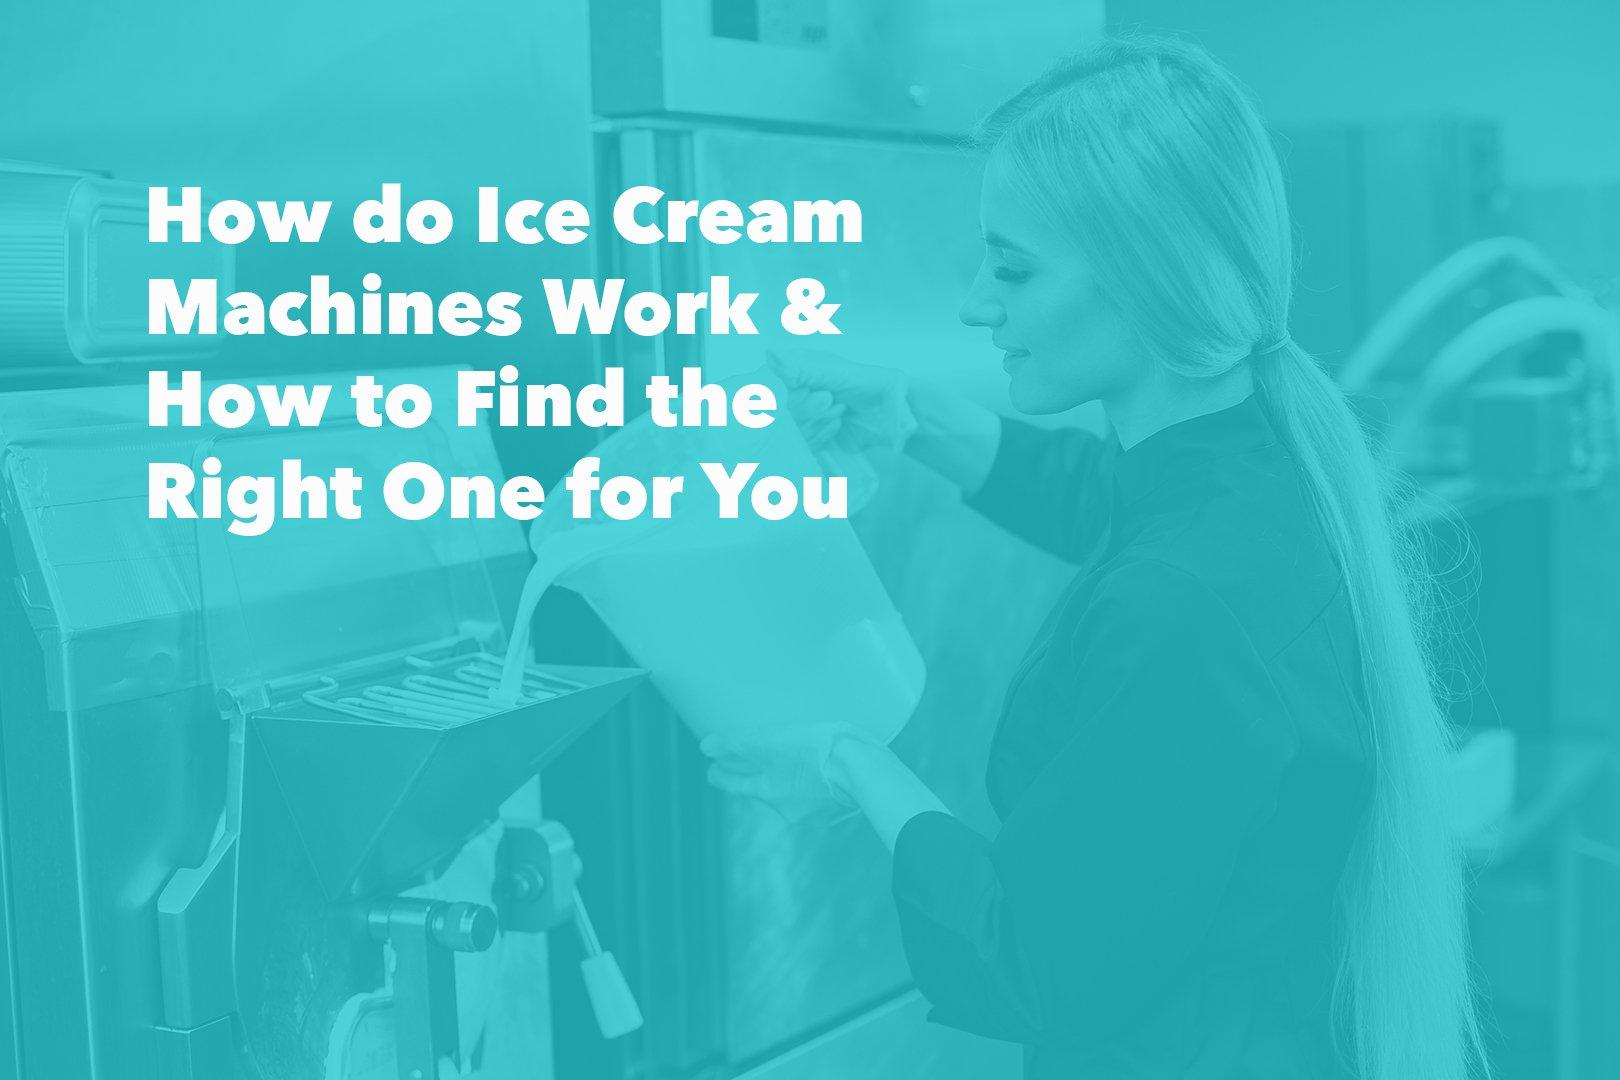 How do Ice Cream Machines Work and How to Find the Right One for